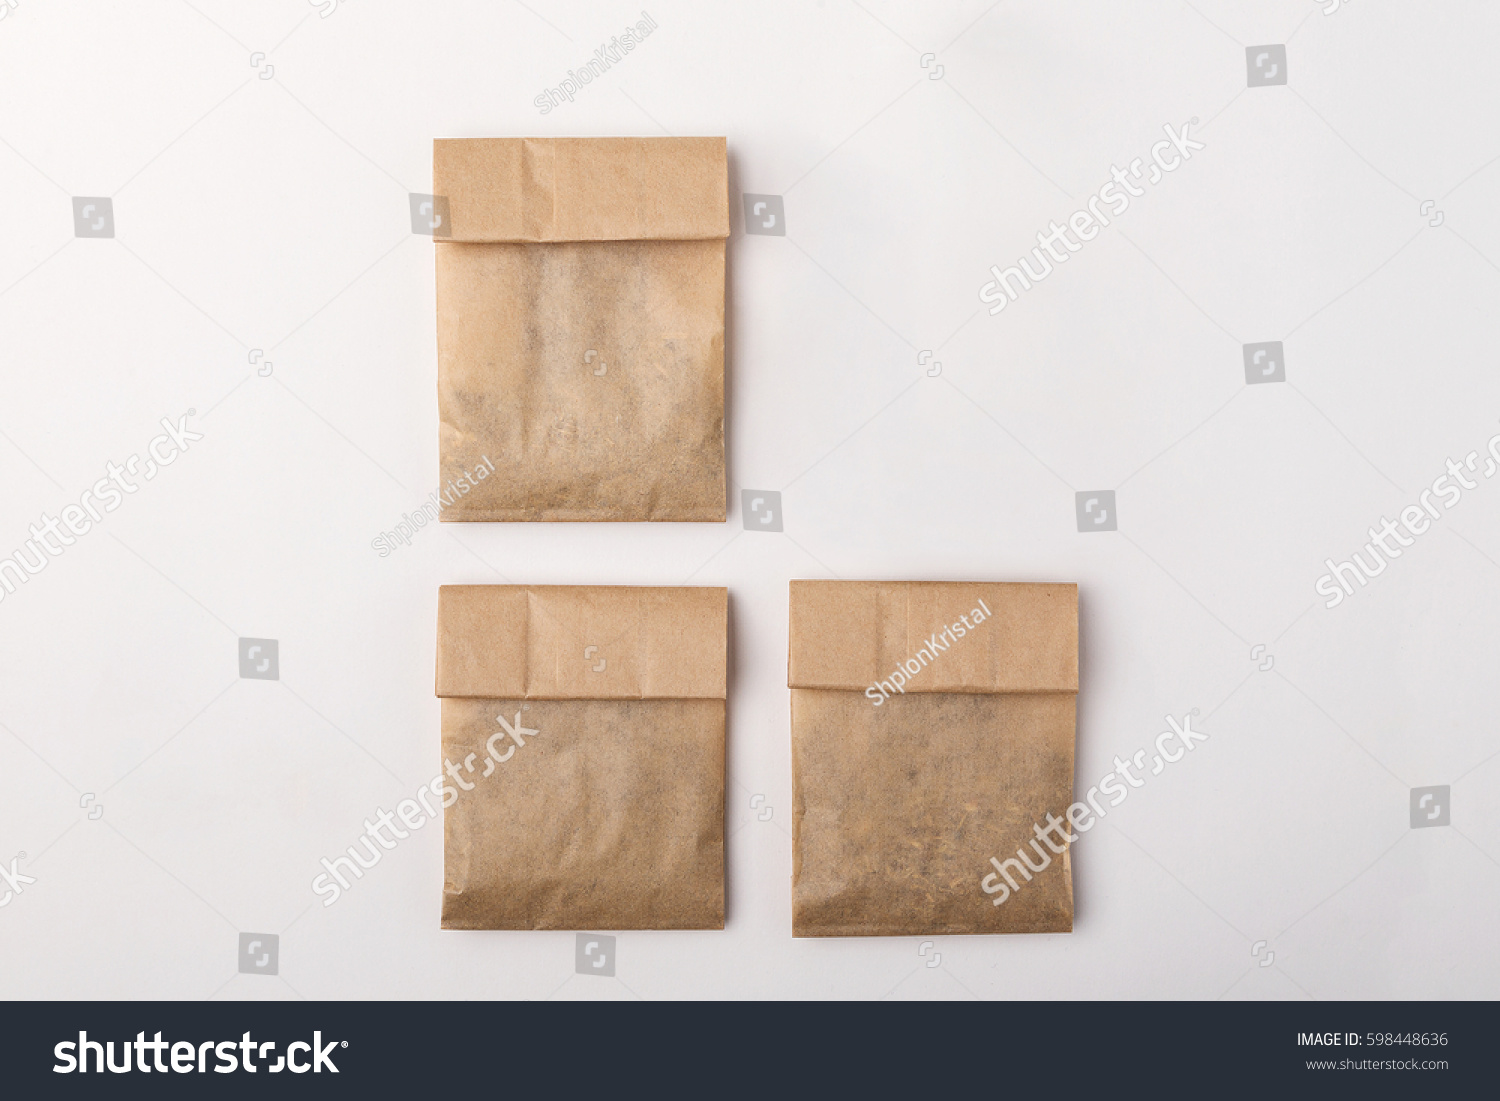 Paper package for herbs #598448636